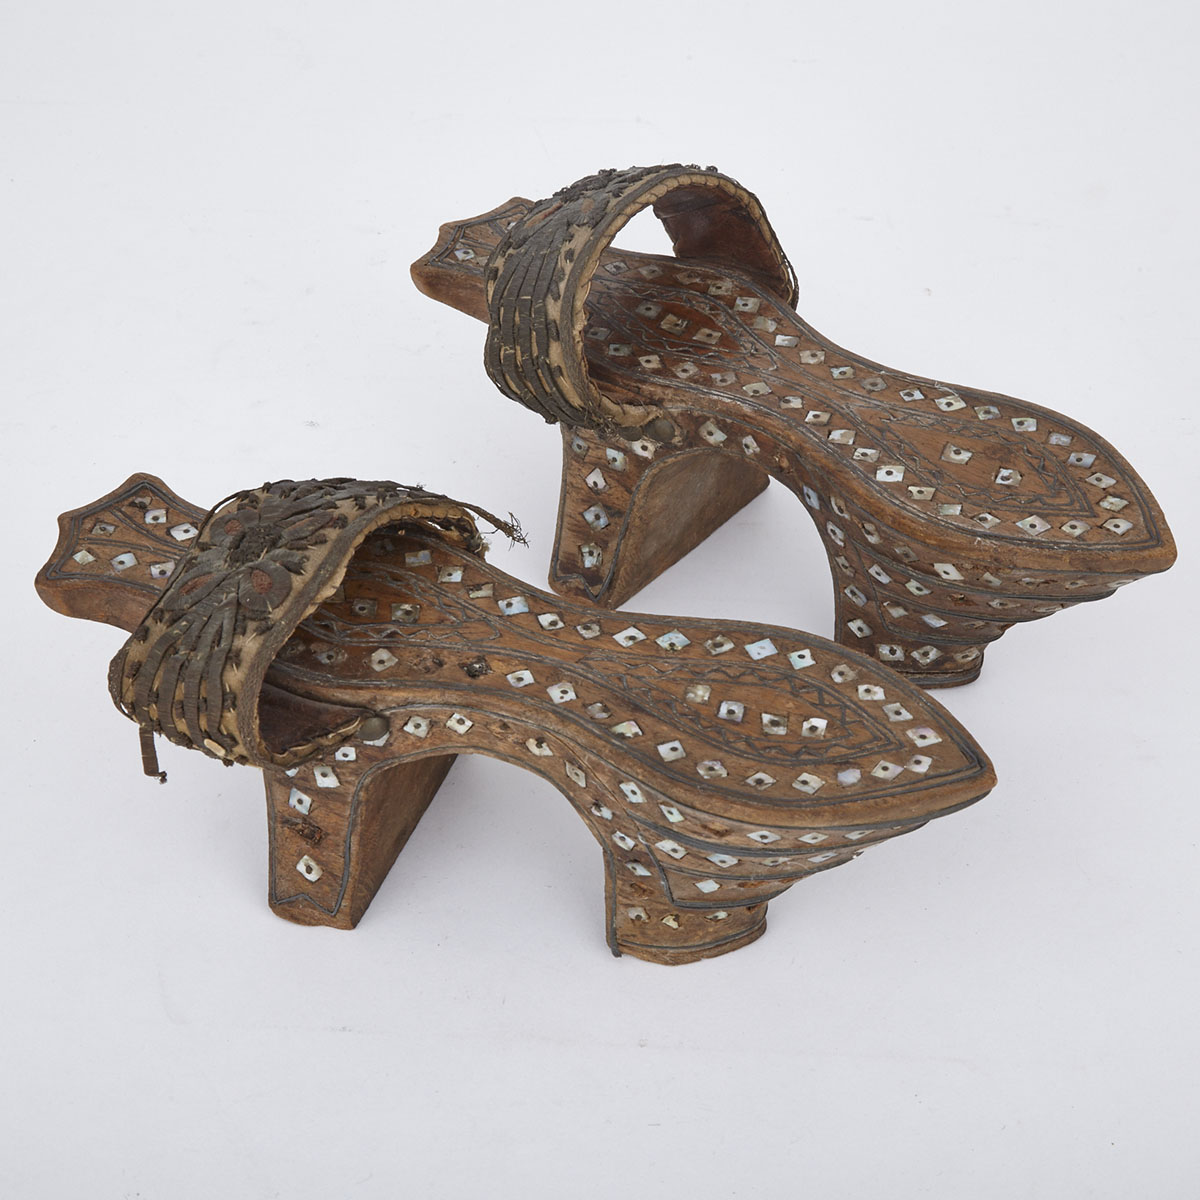 Pair of Turkish Ottoman Hammam  Shoes, 19th/early 20th century